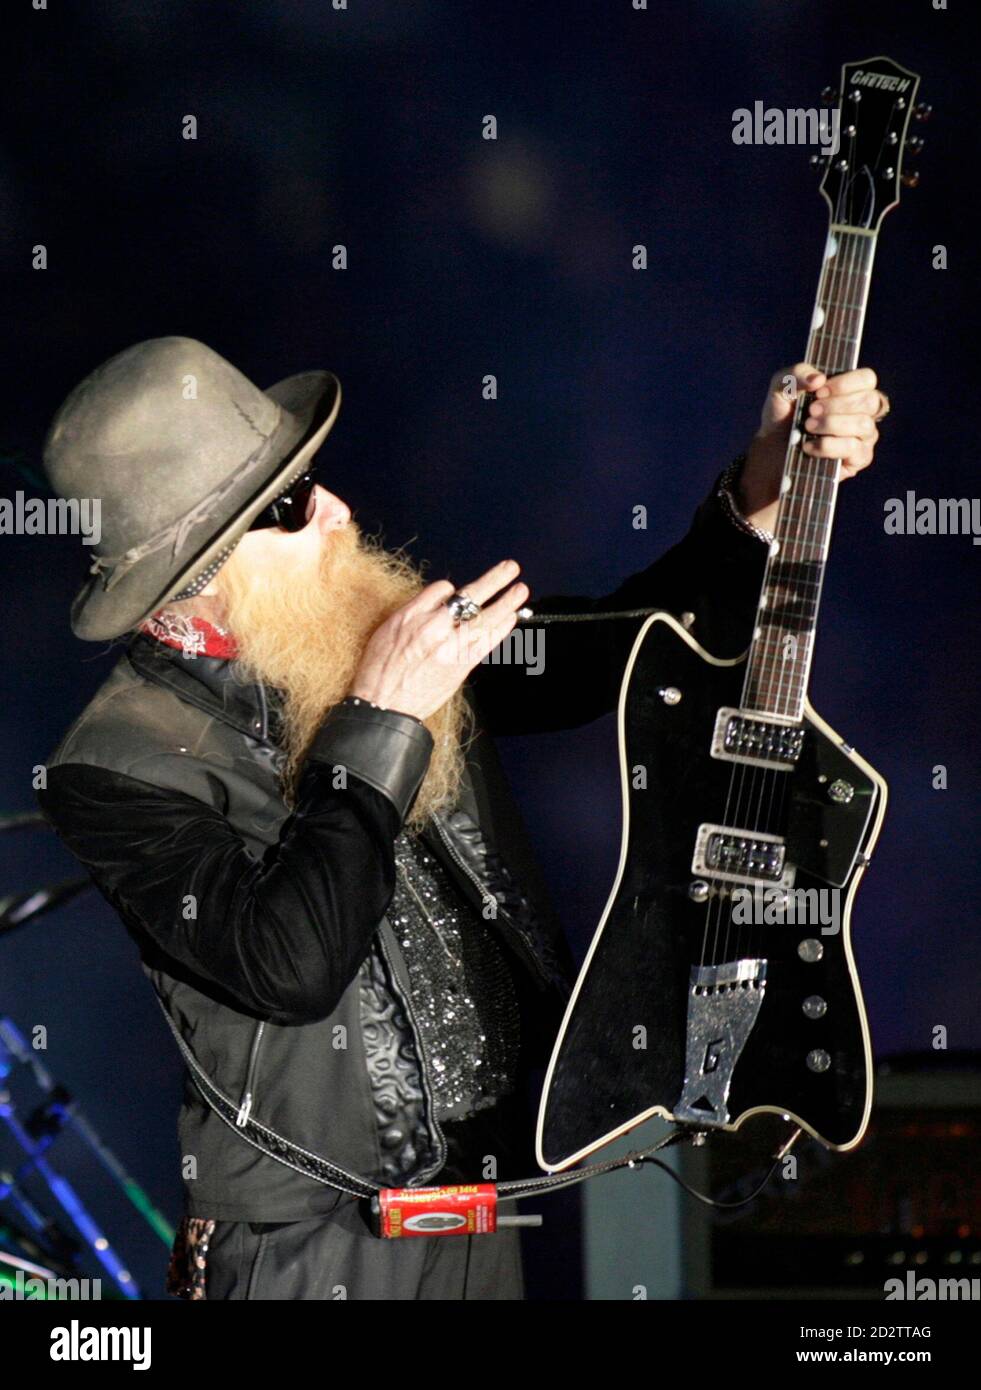 Billy Gibbons of the band ZZ Top performs at halftime during the NCAA  Orange Bowl football game between the Kansas Jayhawks and Virginia Tech  Hokies in Miami, January 3, 2008. REUTERS/Robert Sullivan (